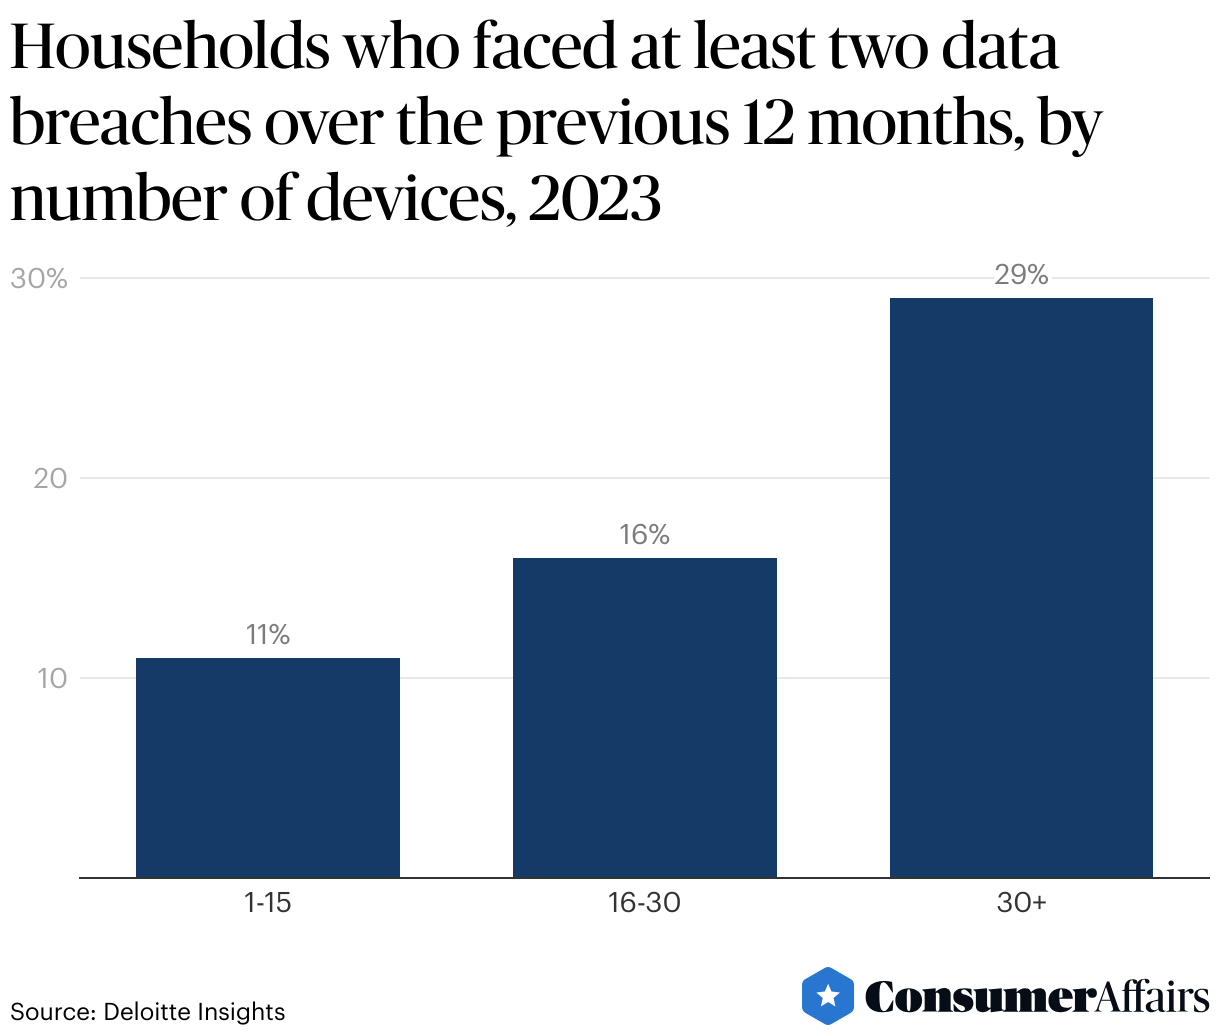 Households who faced at least two data breaches over the previous 12 months, by number of devices, 2023